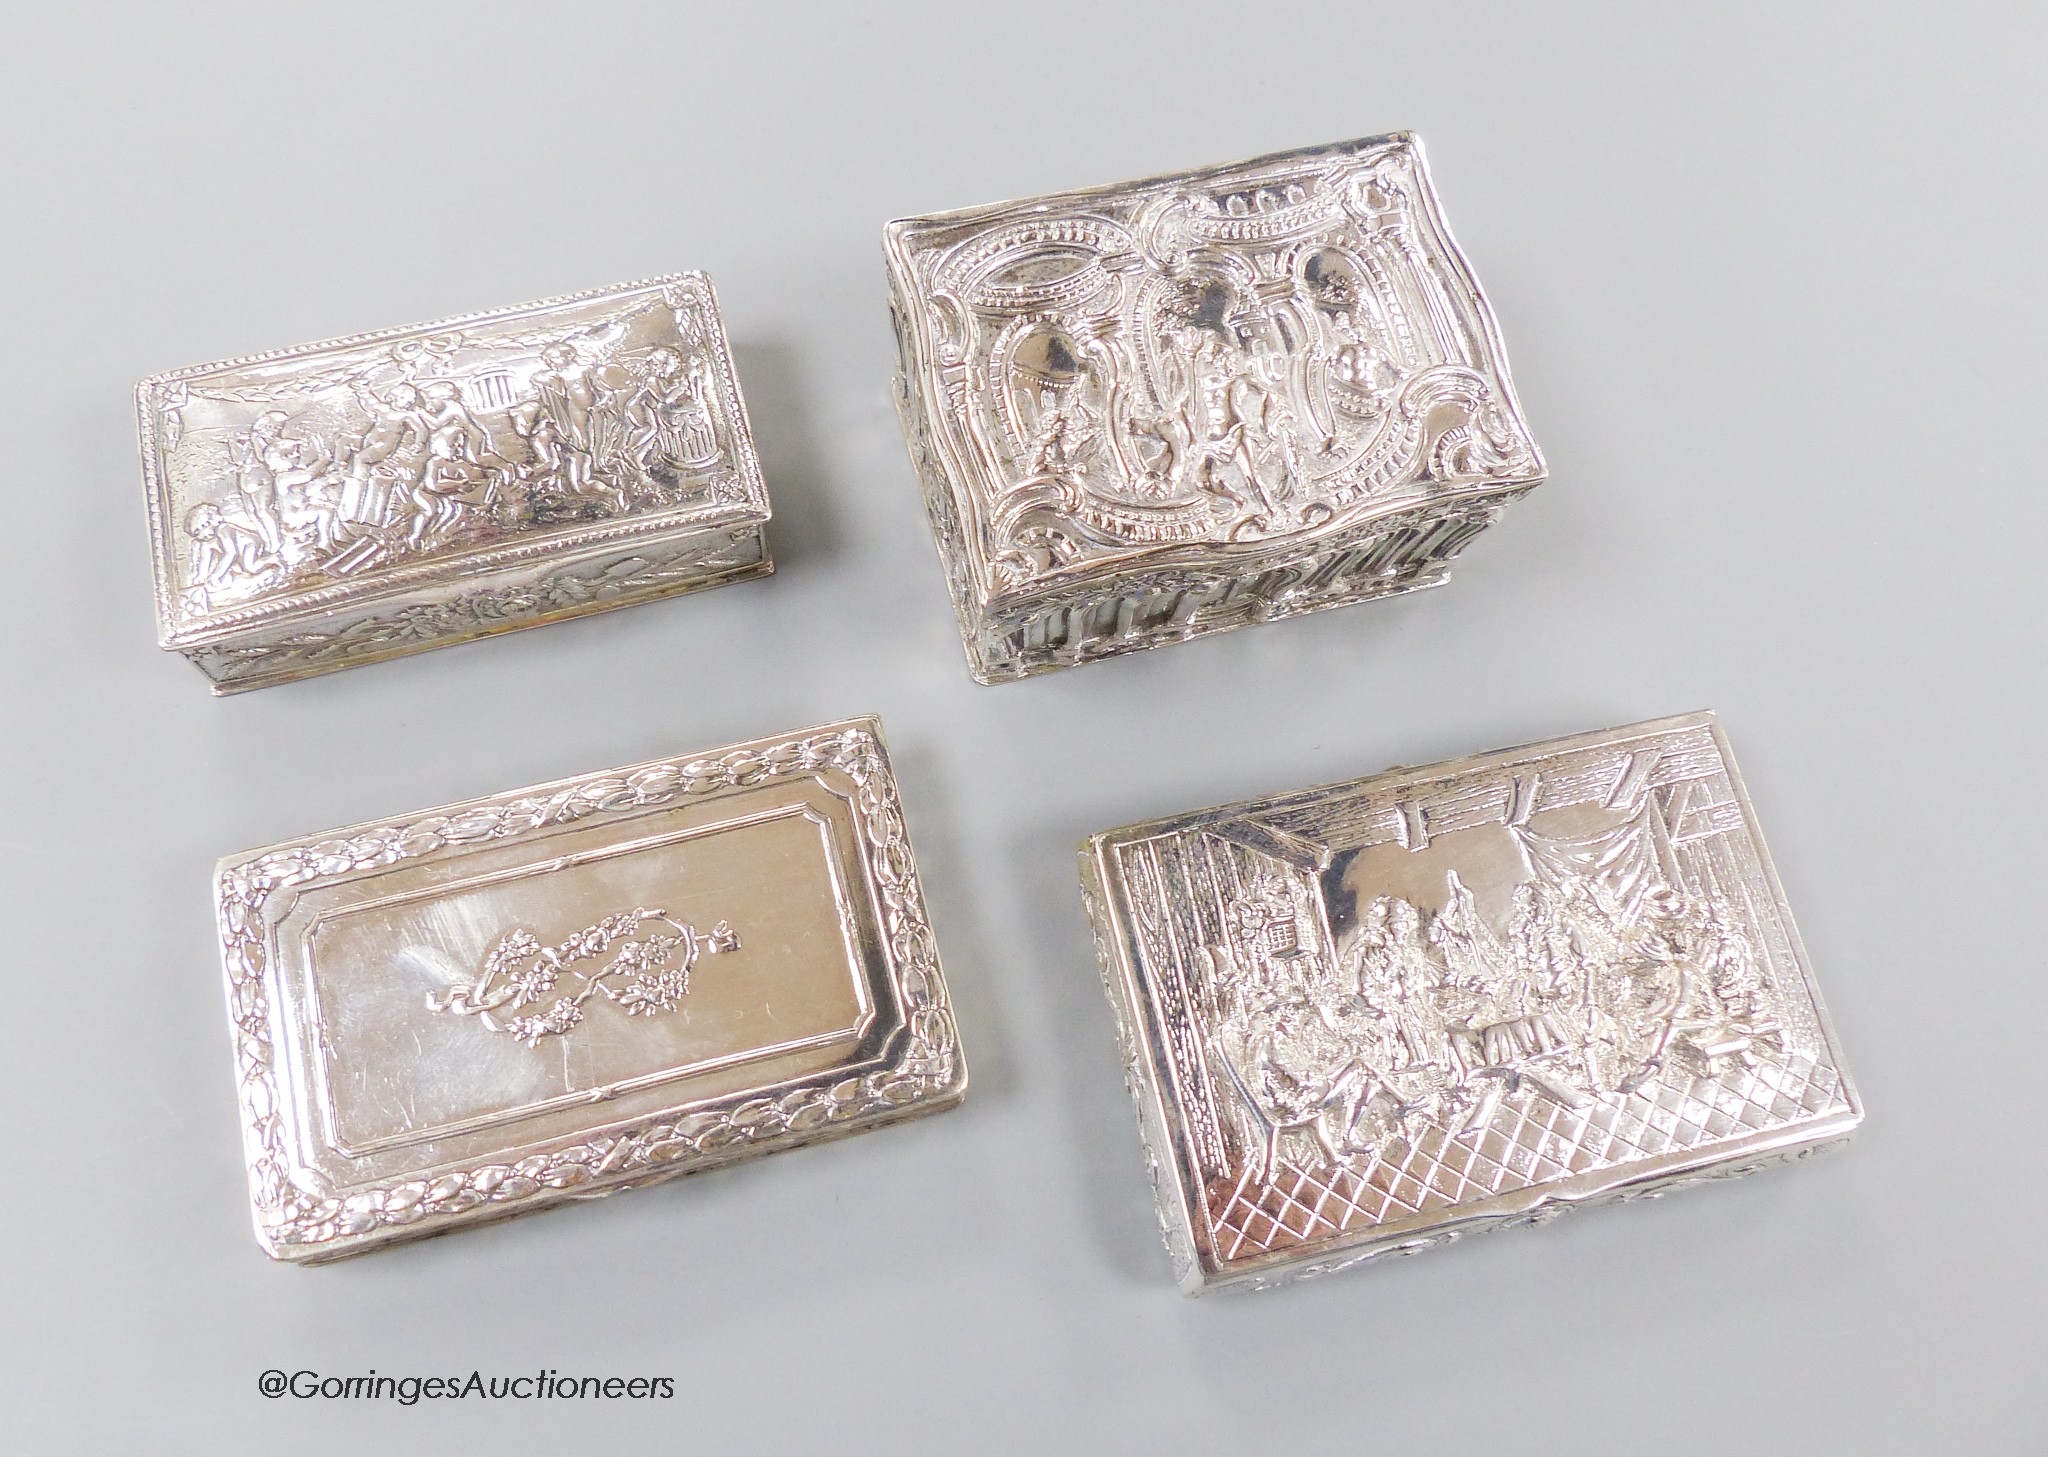 Three early 20th century German 800 standard white metal snuff boxes and one other continental white metal box, largest 86mm, 11.5 oz.